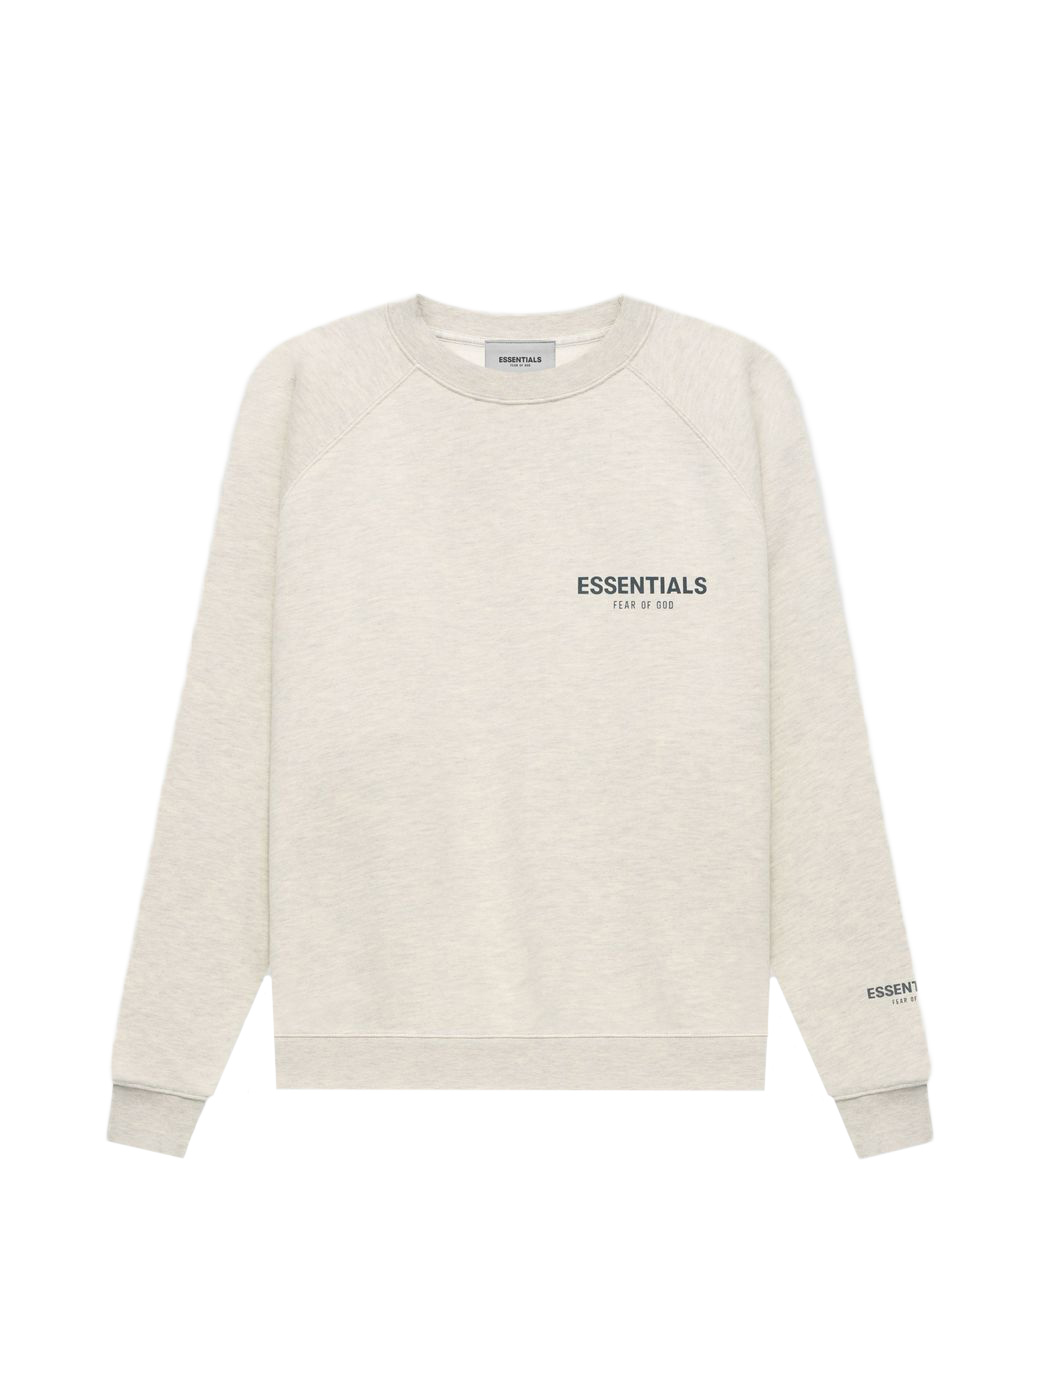 Fear of God Essentials Core Collection Pullover Crewneck Light Heather  Oatmeal